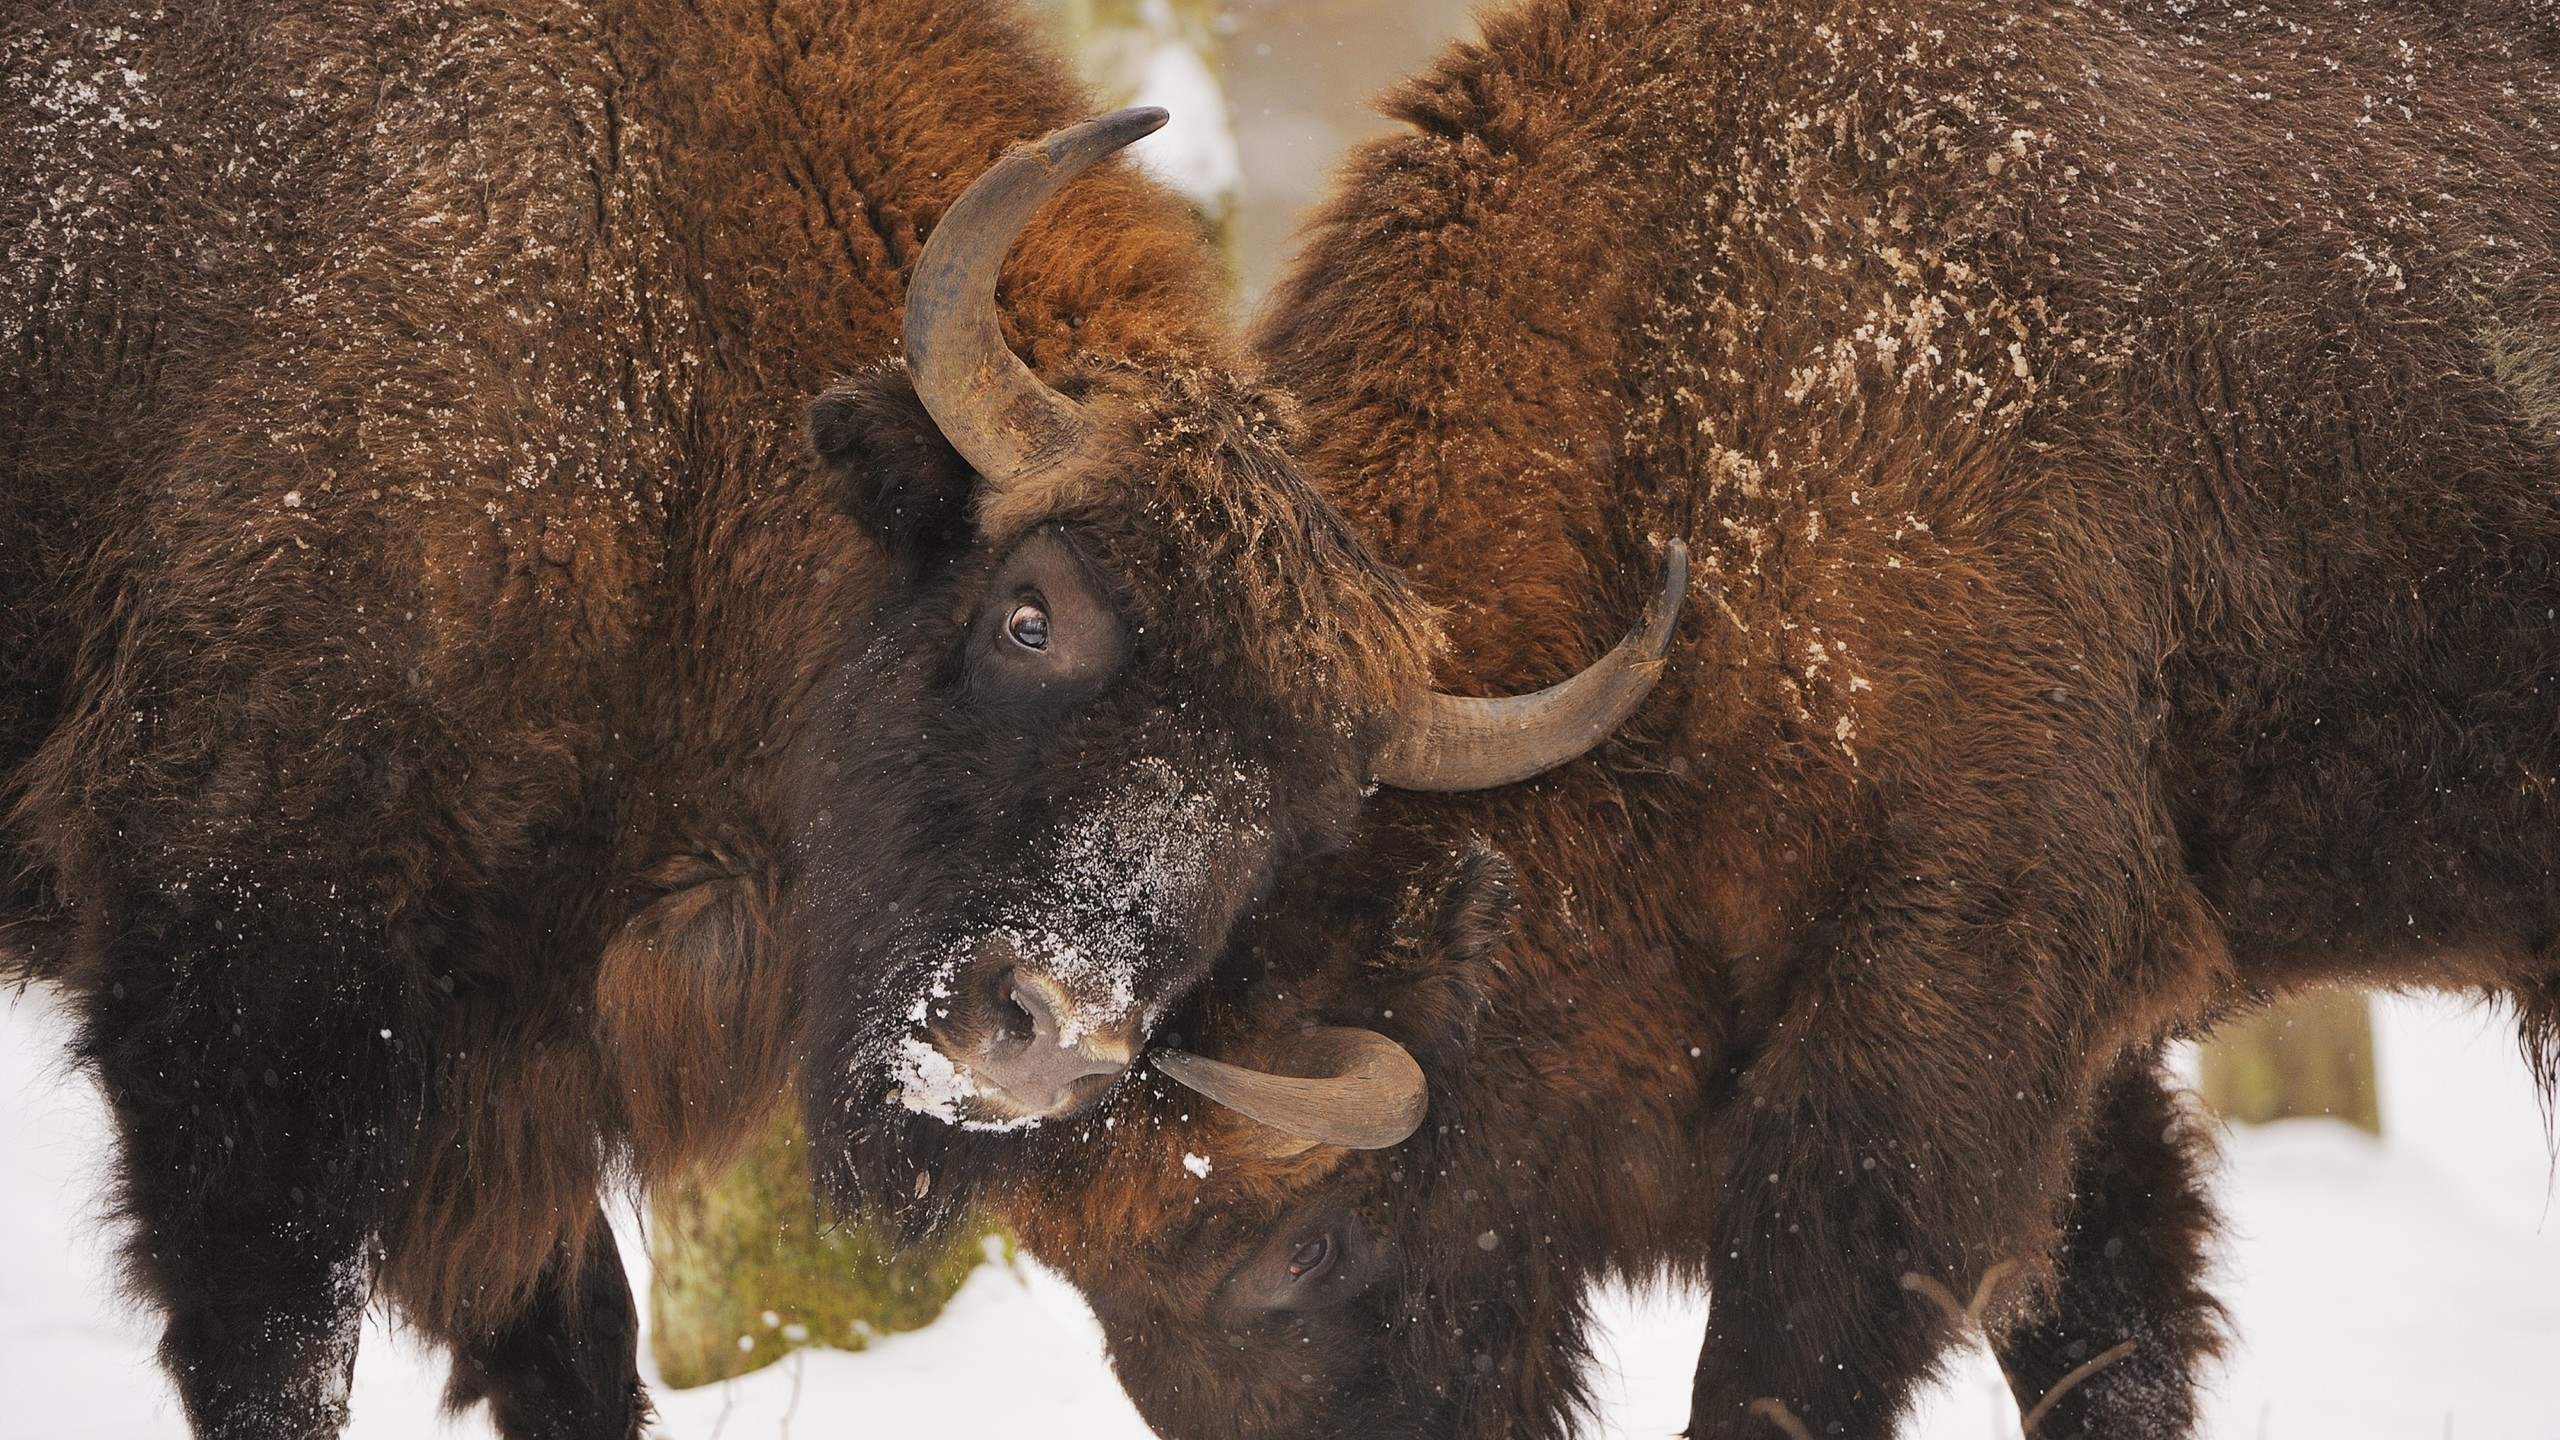 Bison Fight for 2560x1440 HDTV resolution